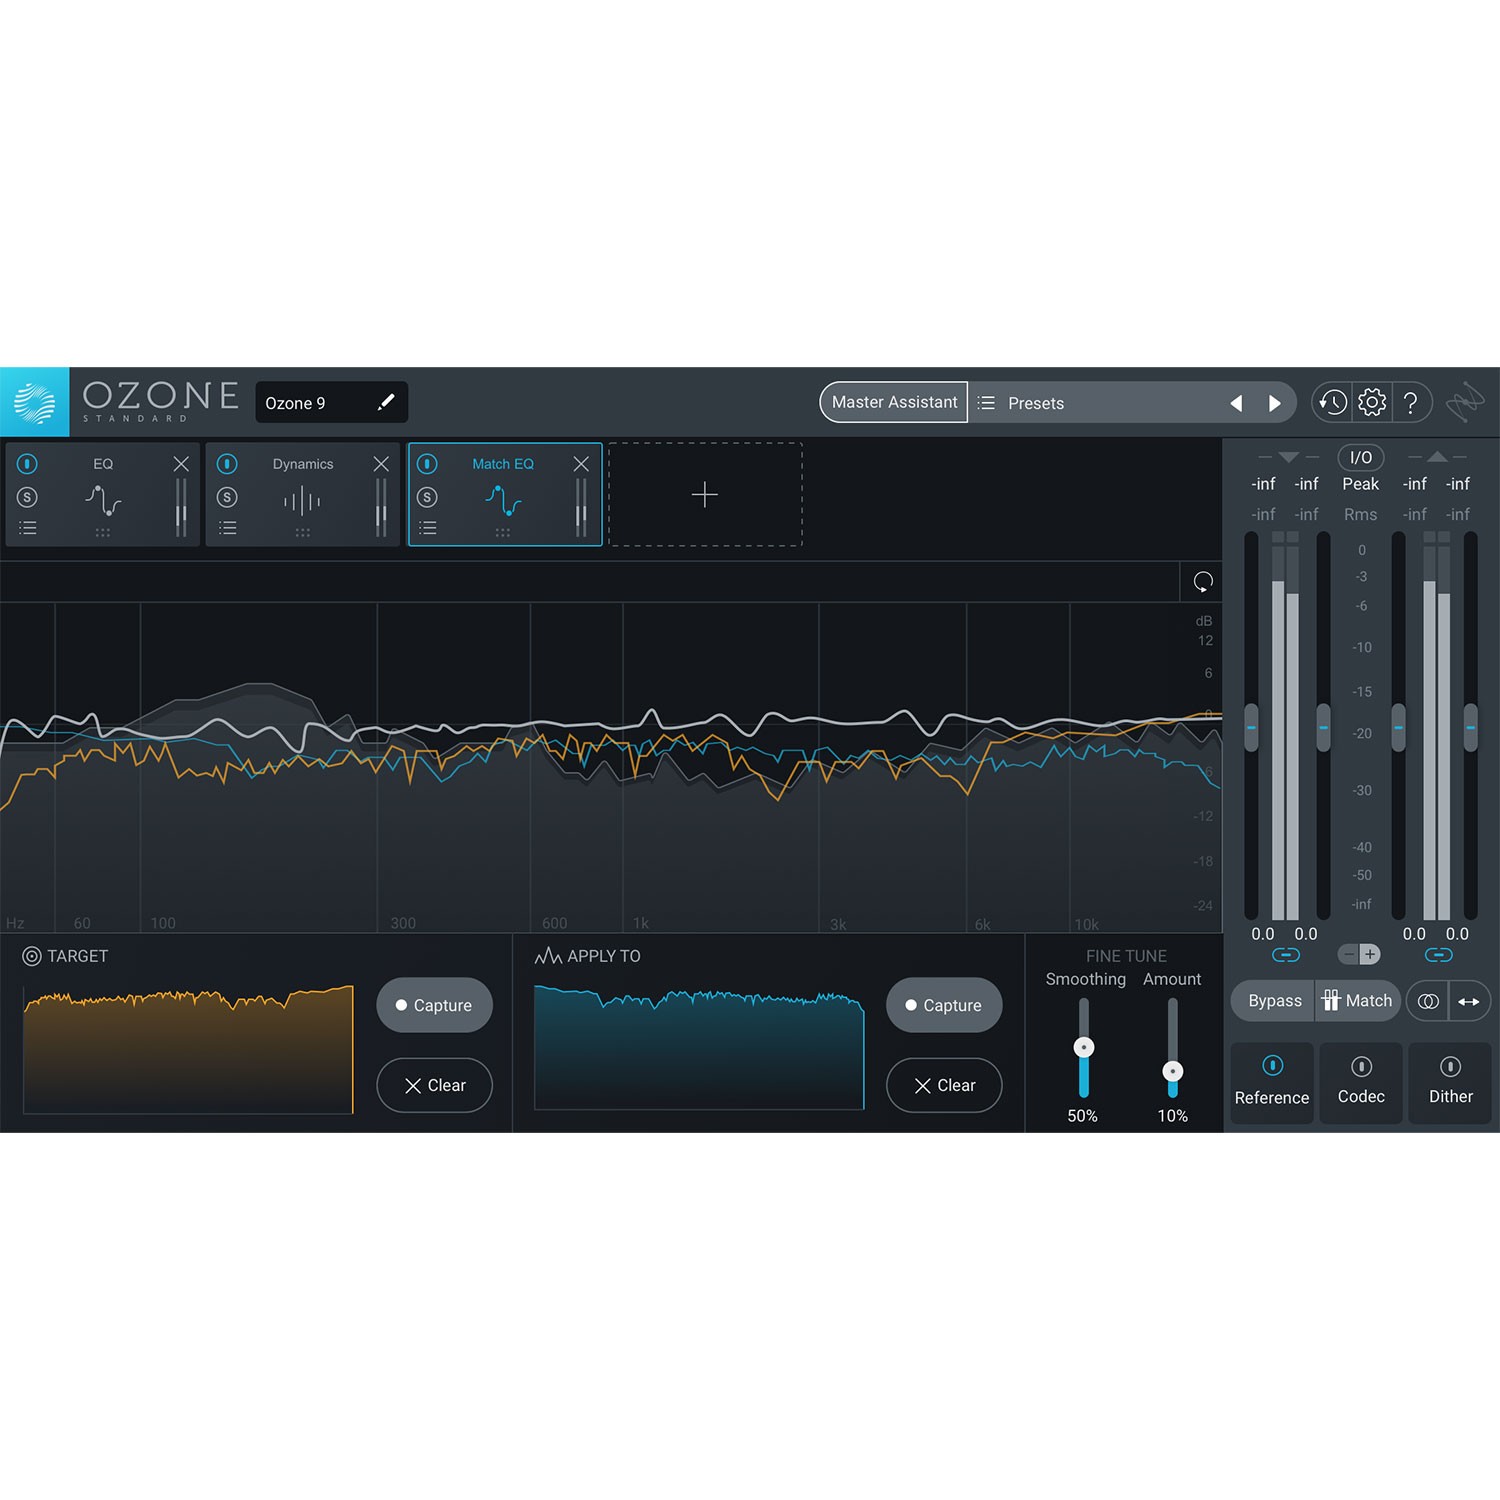 Move izotope rx to external hard drive download